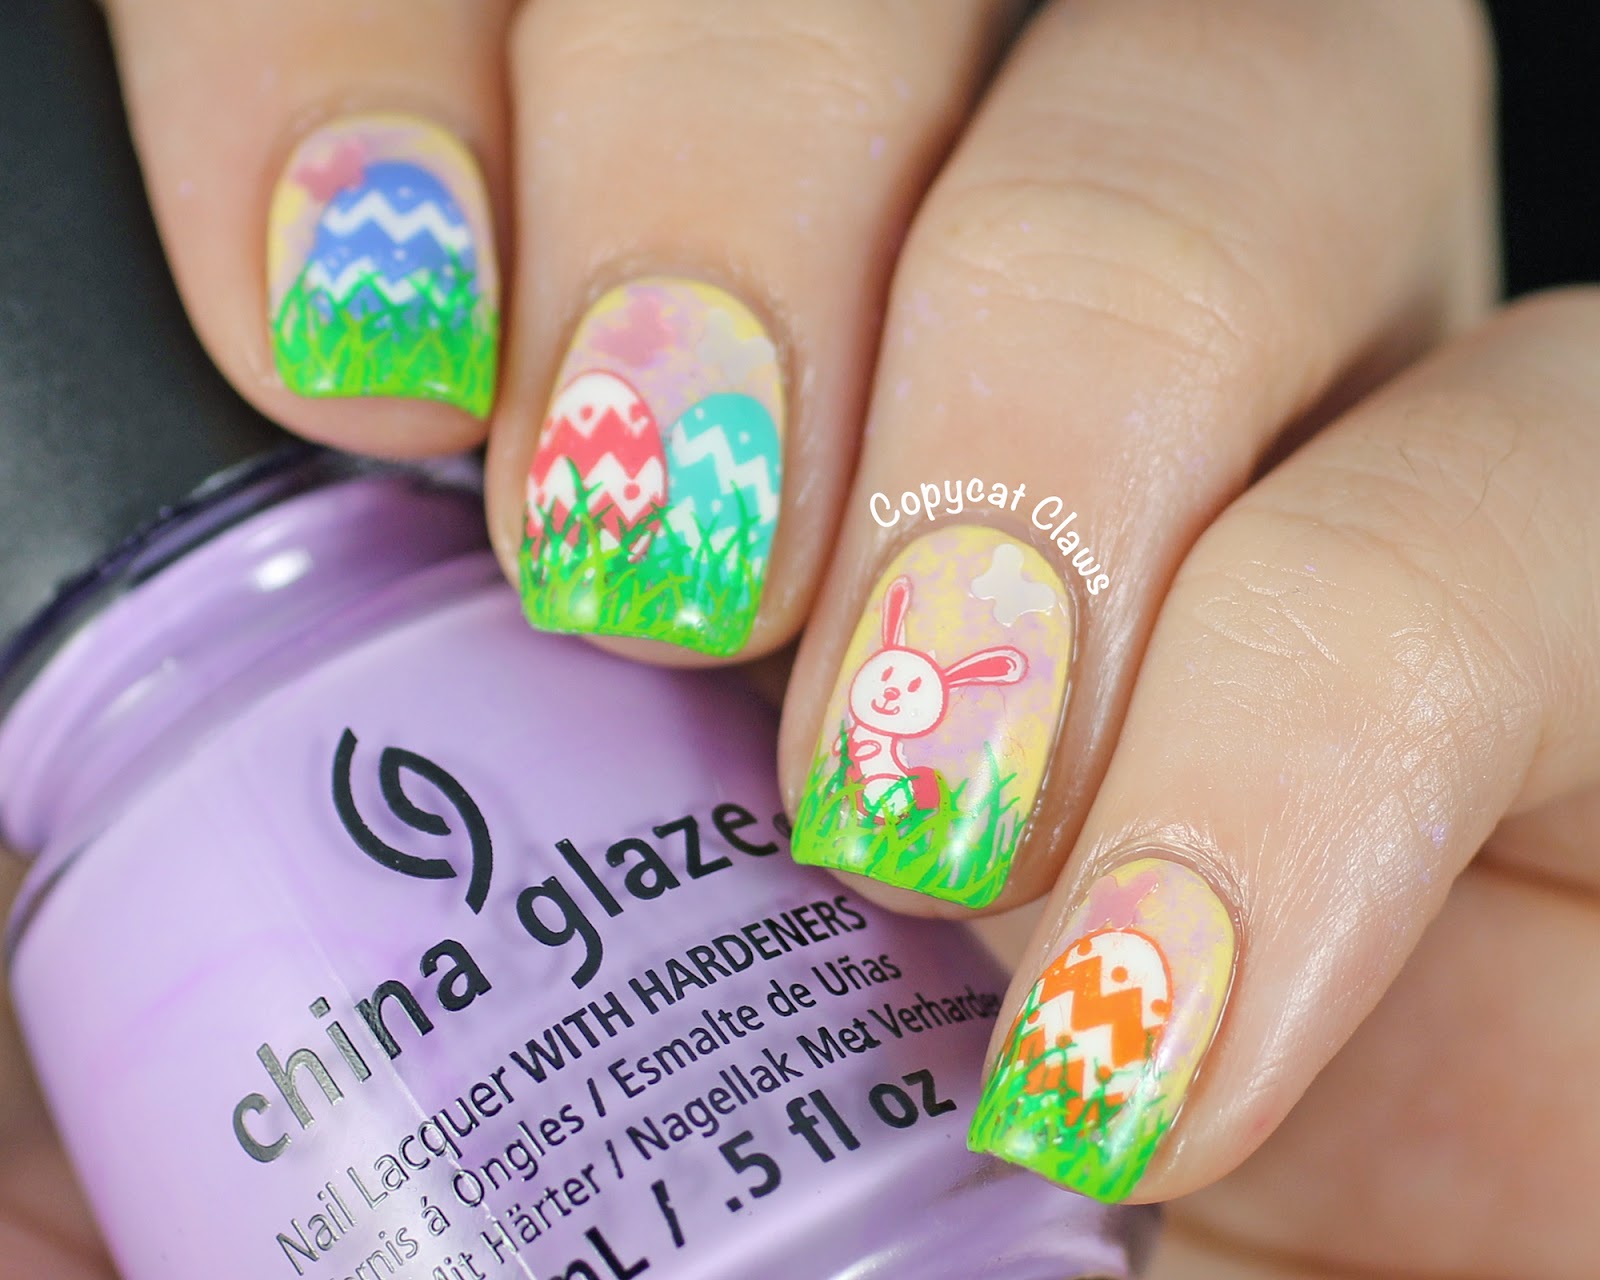 8. "Easter Nail Art: The Resurrection Story" - wide 5